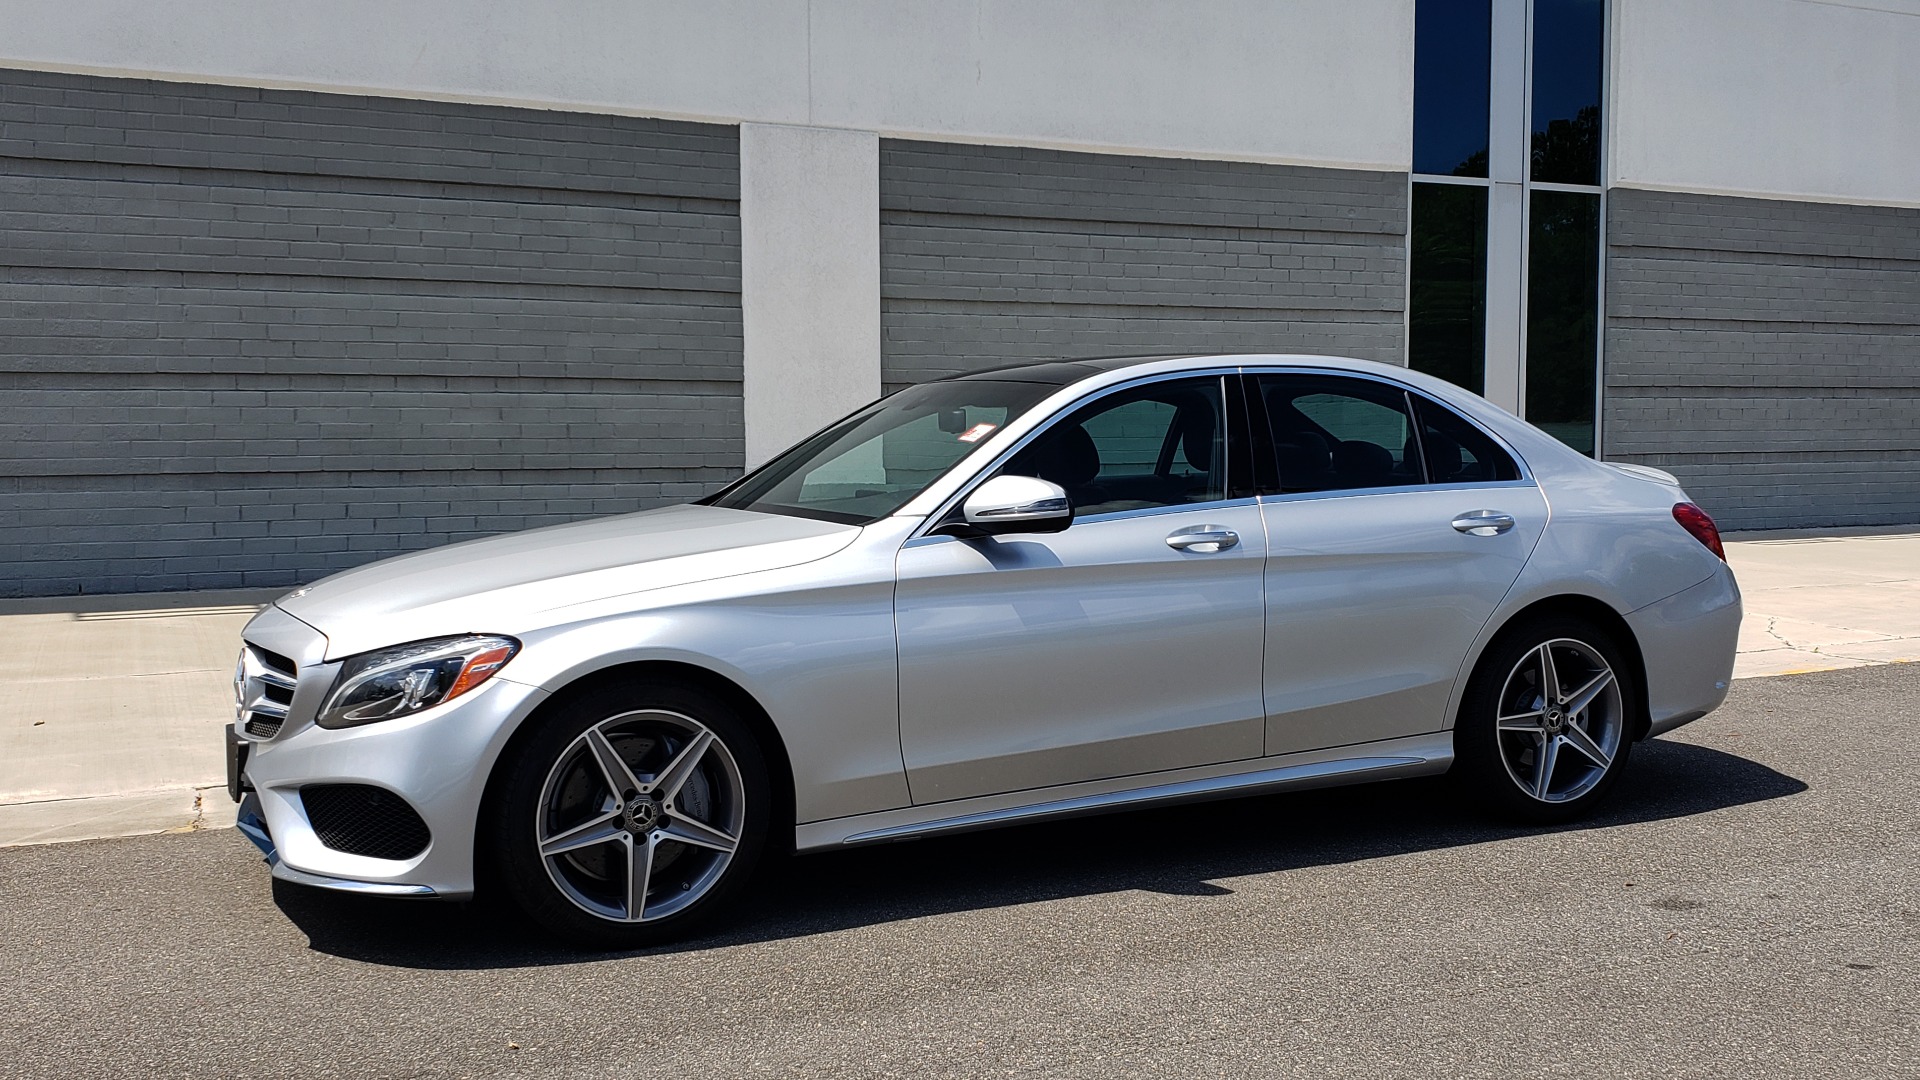 Used 2018 Mercedes-Benz C-CLASS C 300 4MATIC / PREMIUM PKG / PANO-ROOF / AMG LINE / BURMESTER / REARVIEW for sale Sold at Formula Imports in Charlotte NC 28227 4